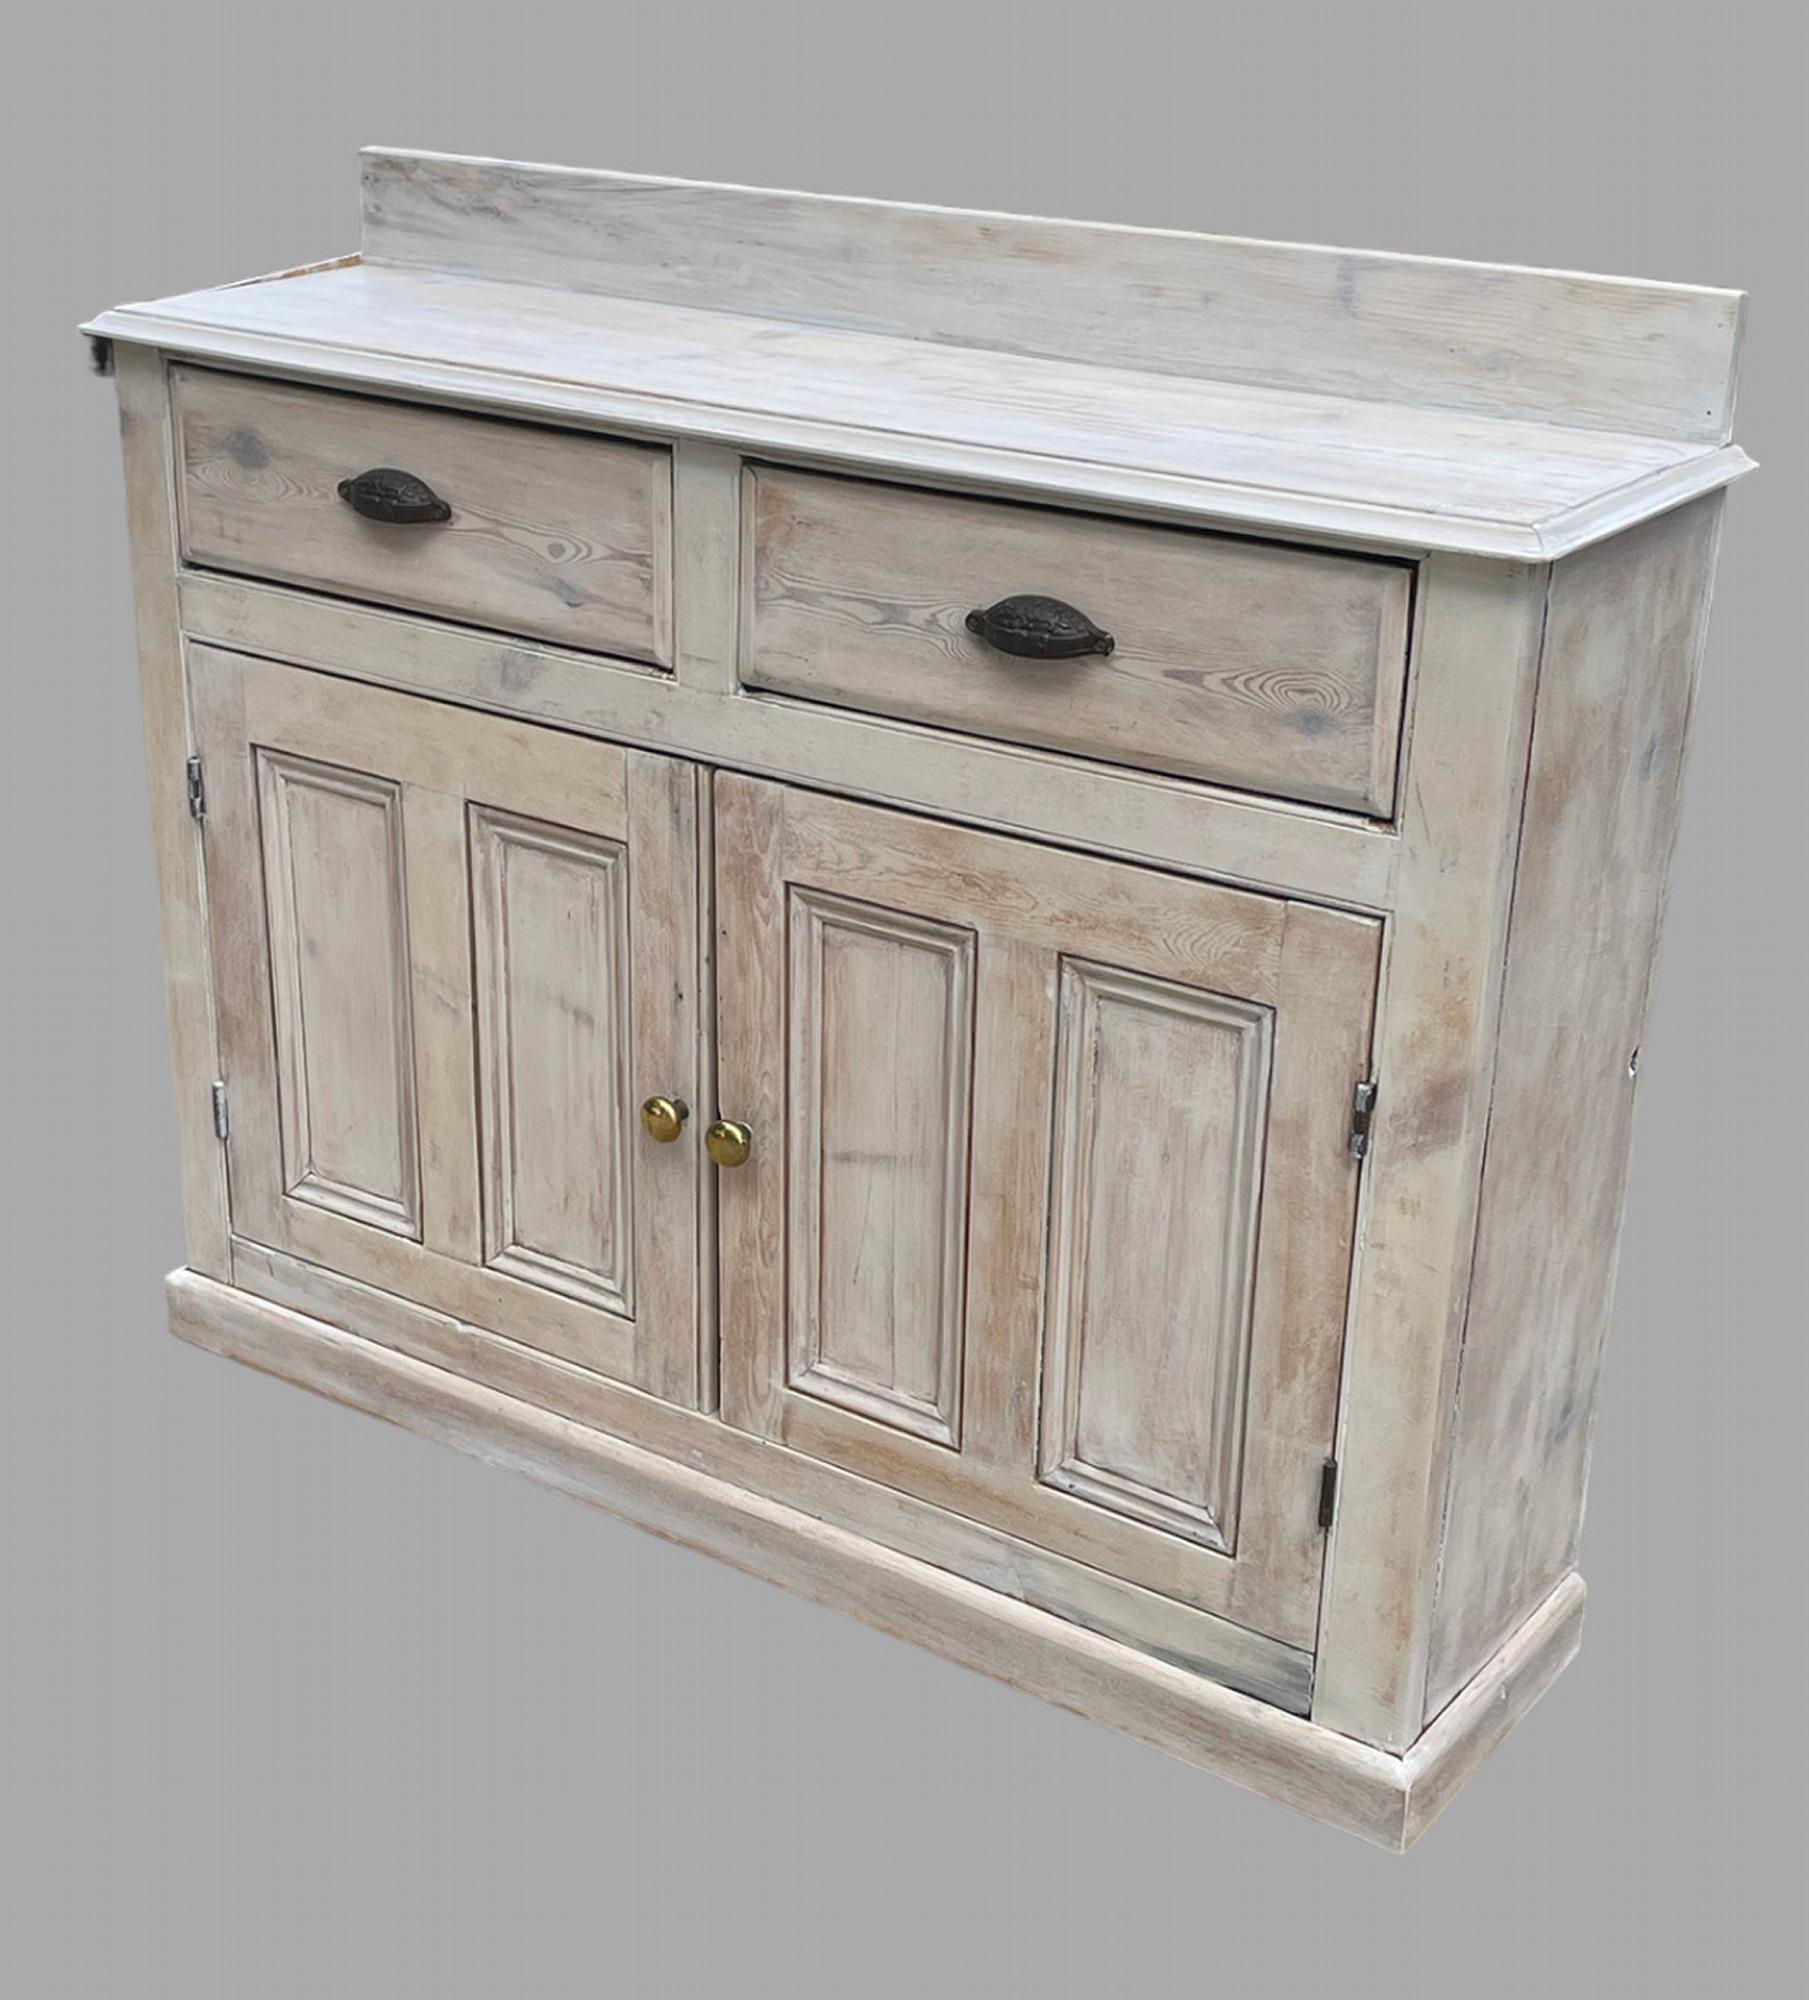 Victorian Lovely Rustic Stripped and Limed Dresser Base